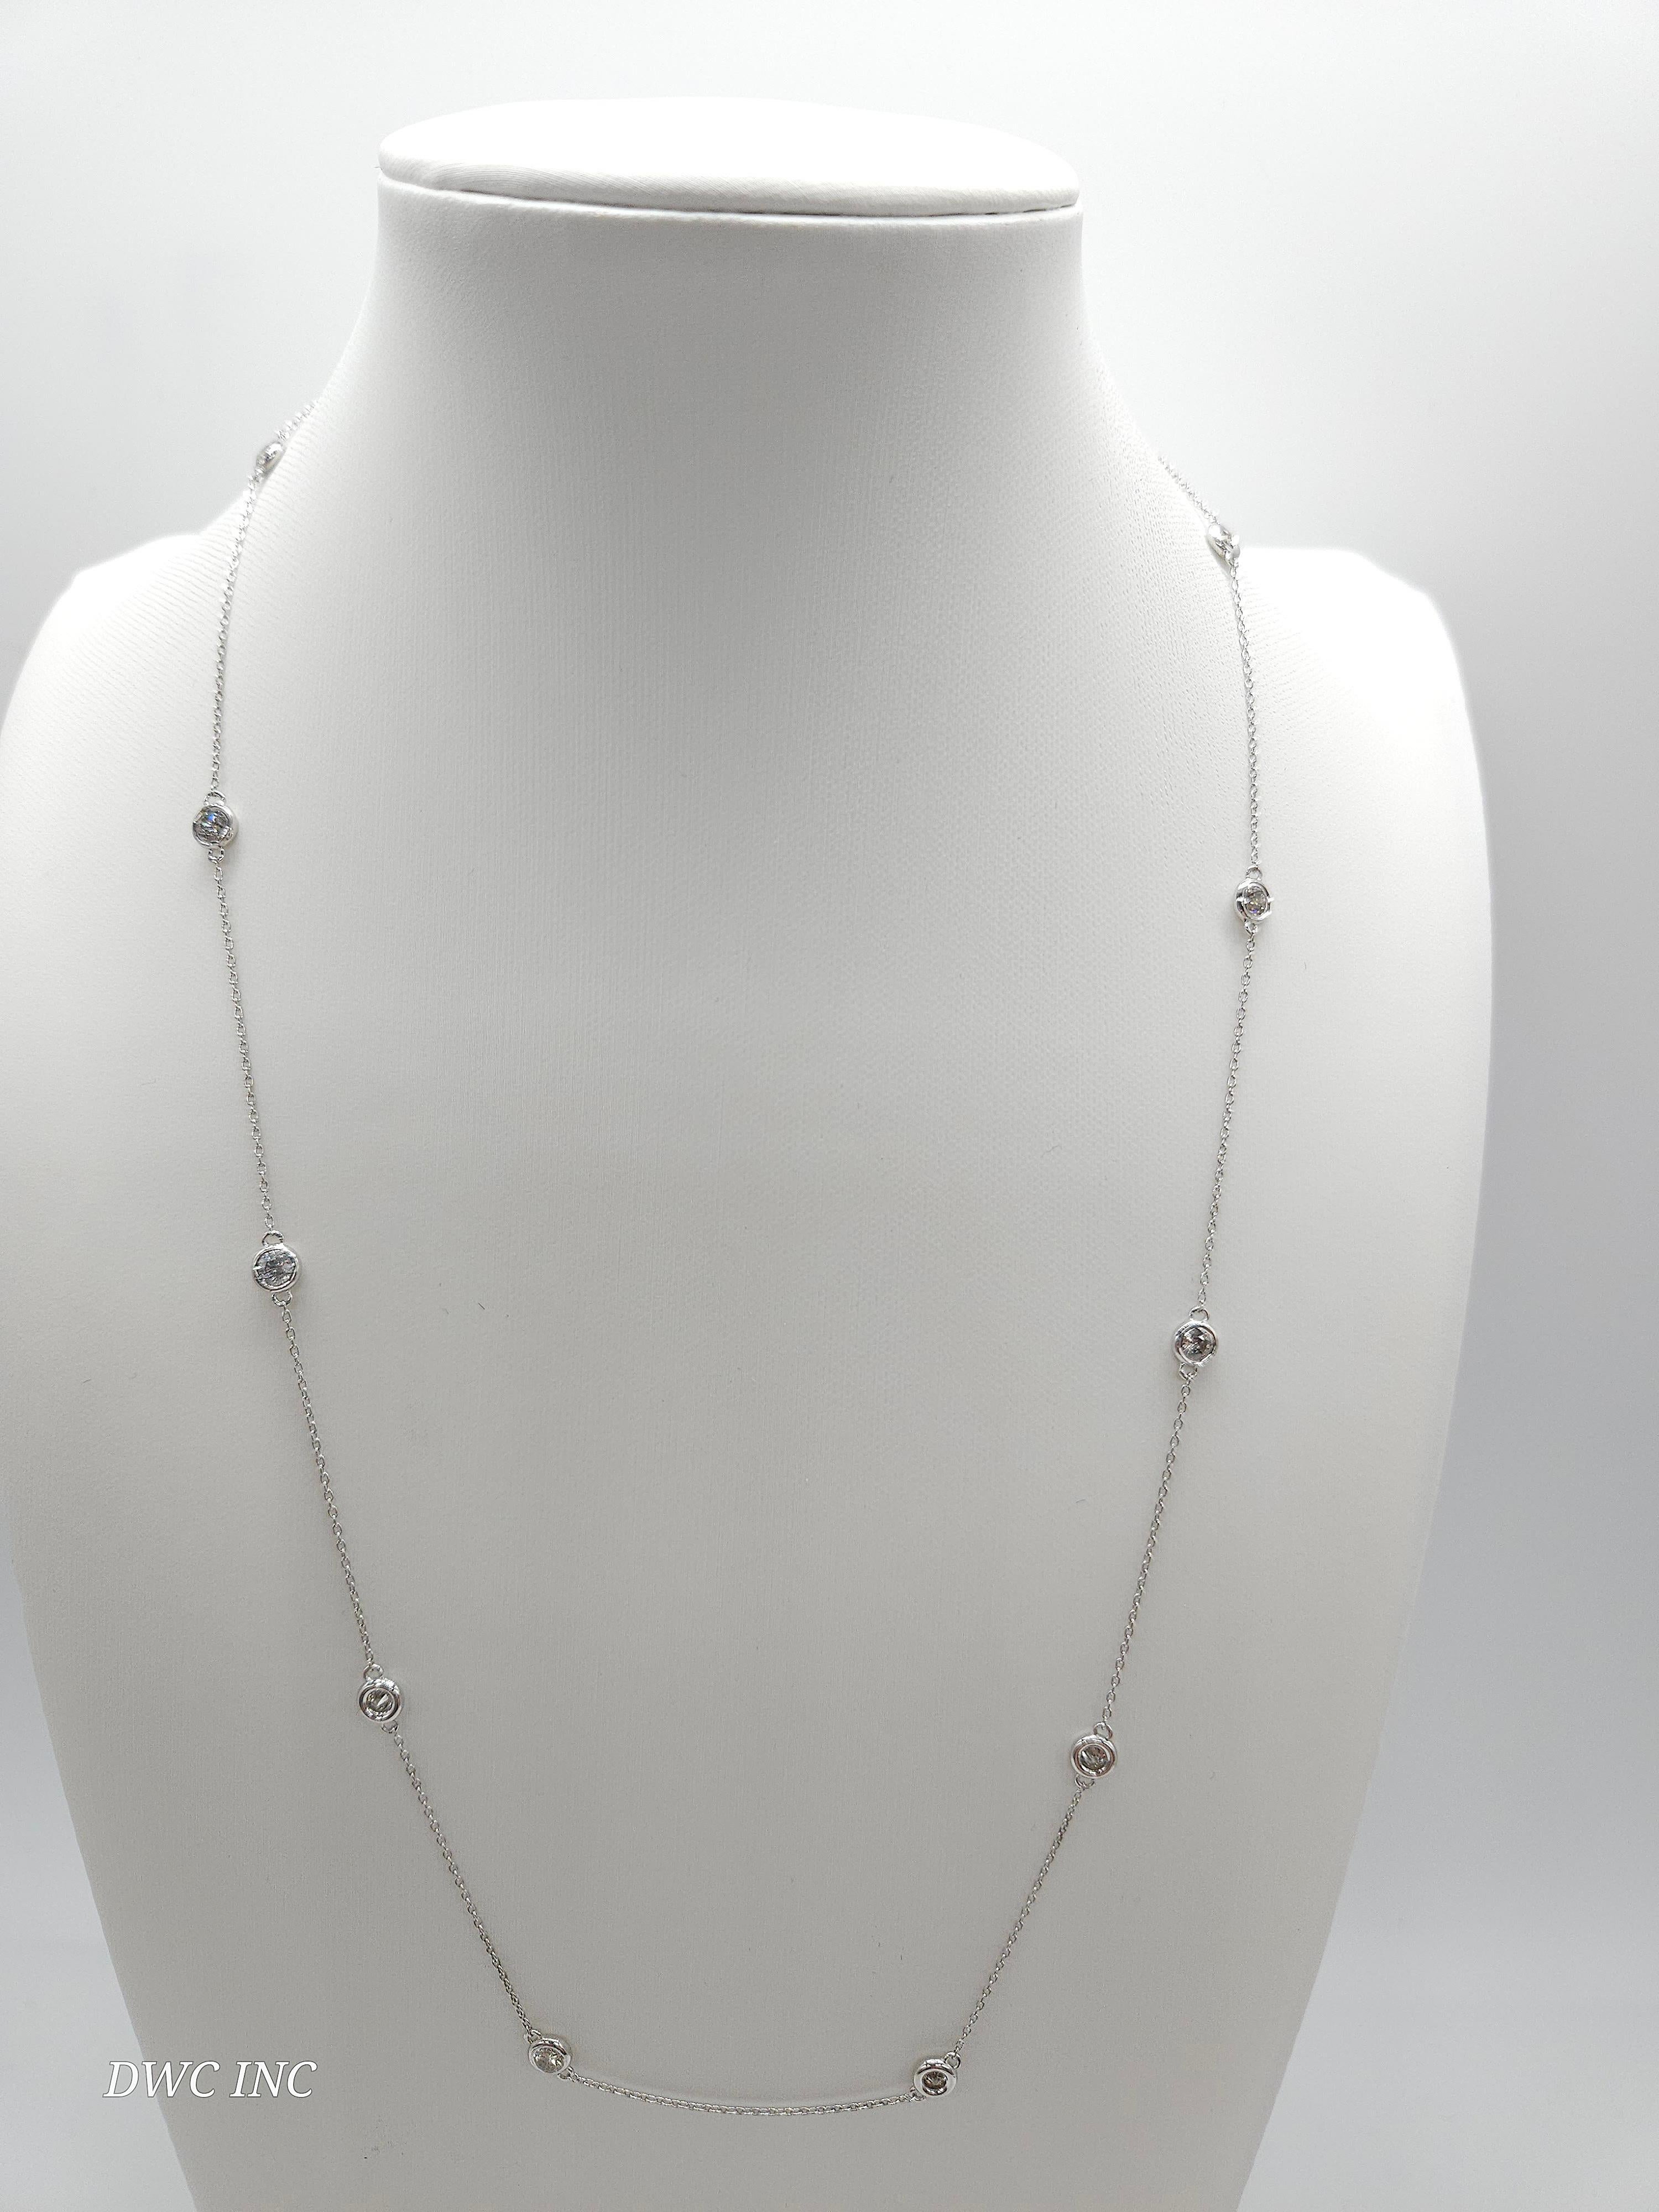 10 Station Diamond by the yard necklace set in Italian made 14K white gold. 
Total weight is 1.23 carats. Beautiful shiny stones. 
Length 16 inch 3.18 grams. Average F-I Natural Diamond

*Free shipping within U.S*